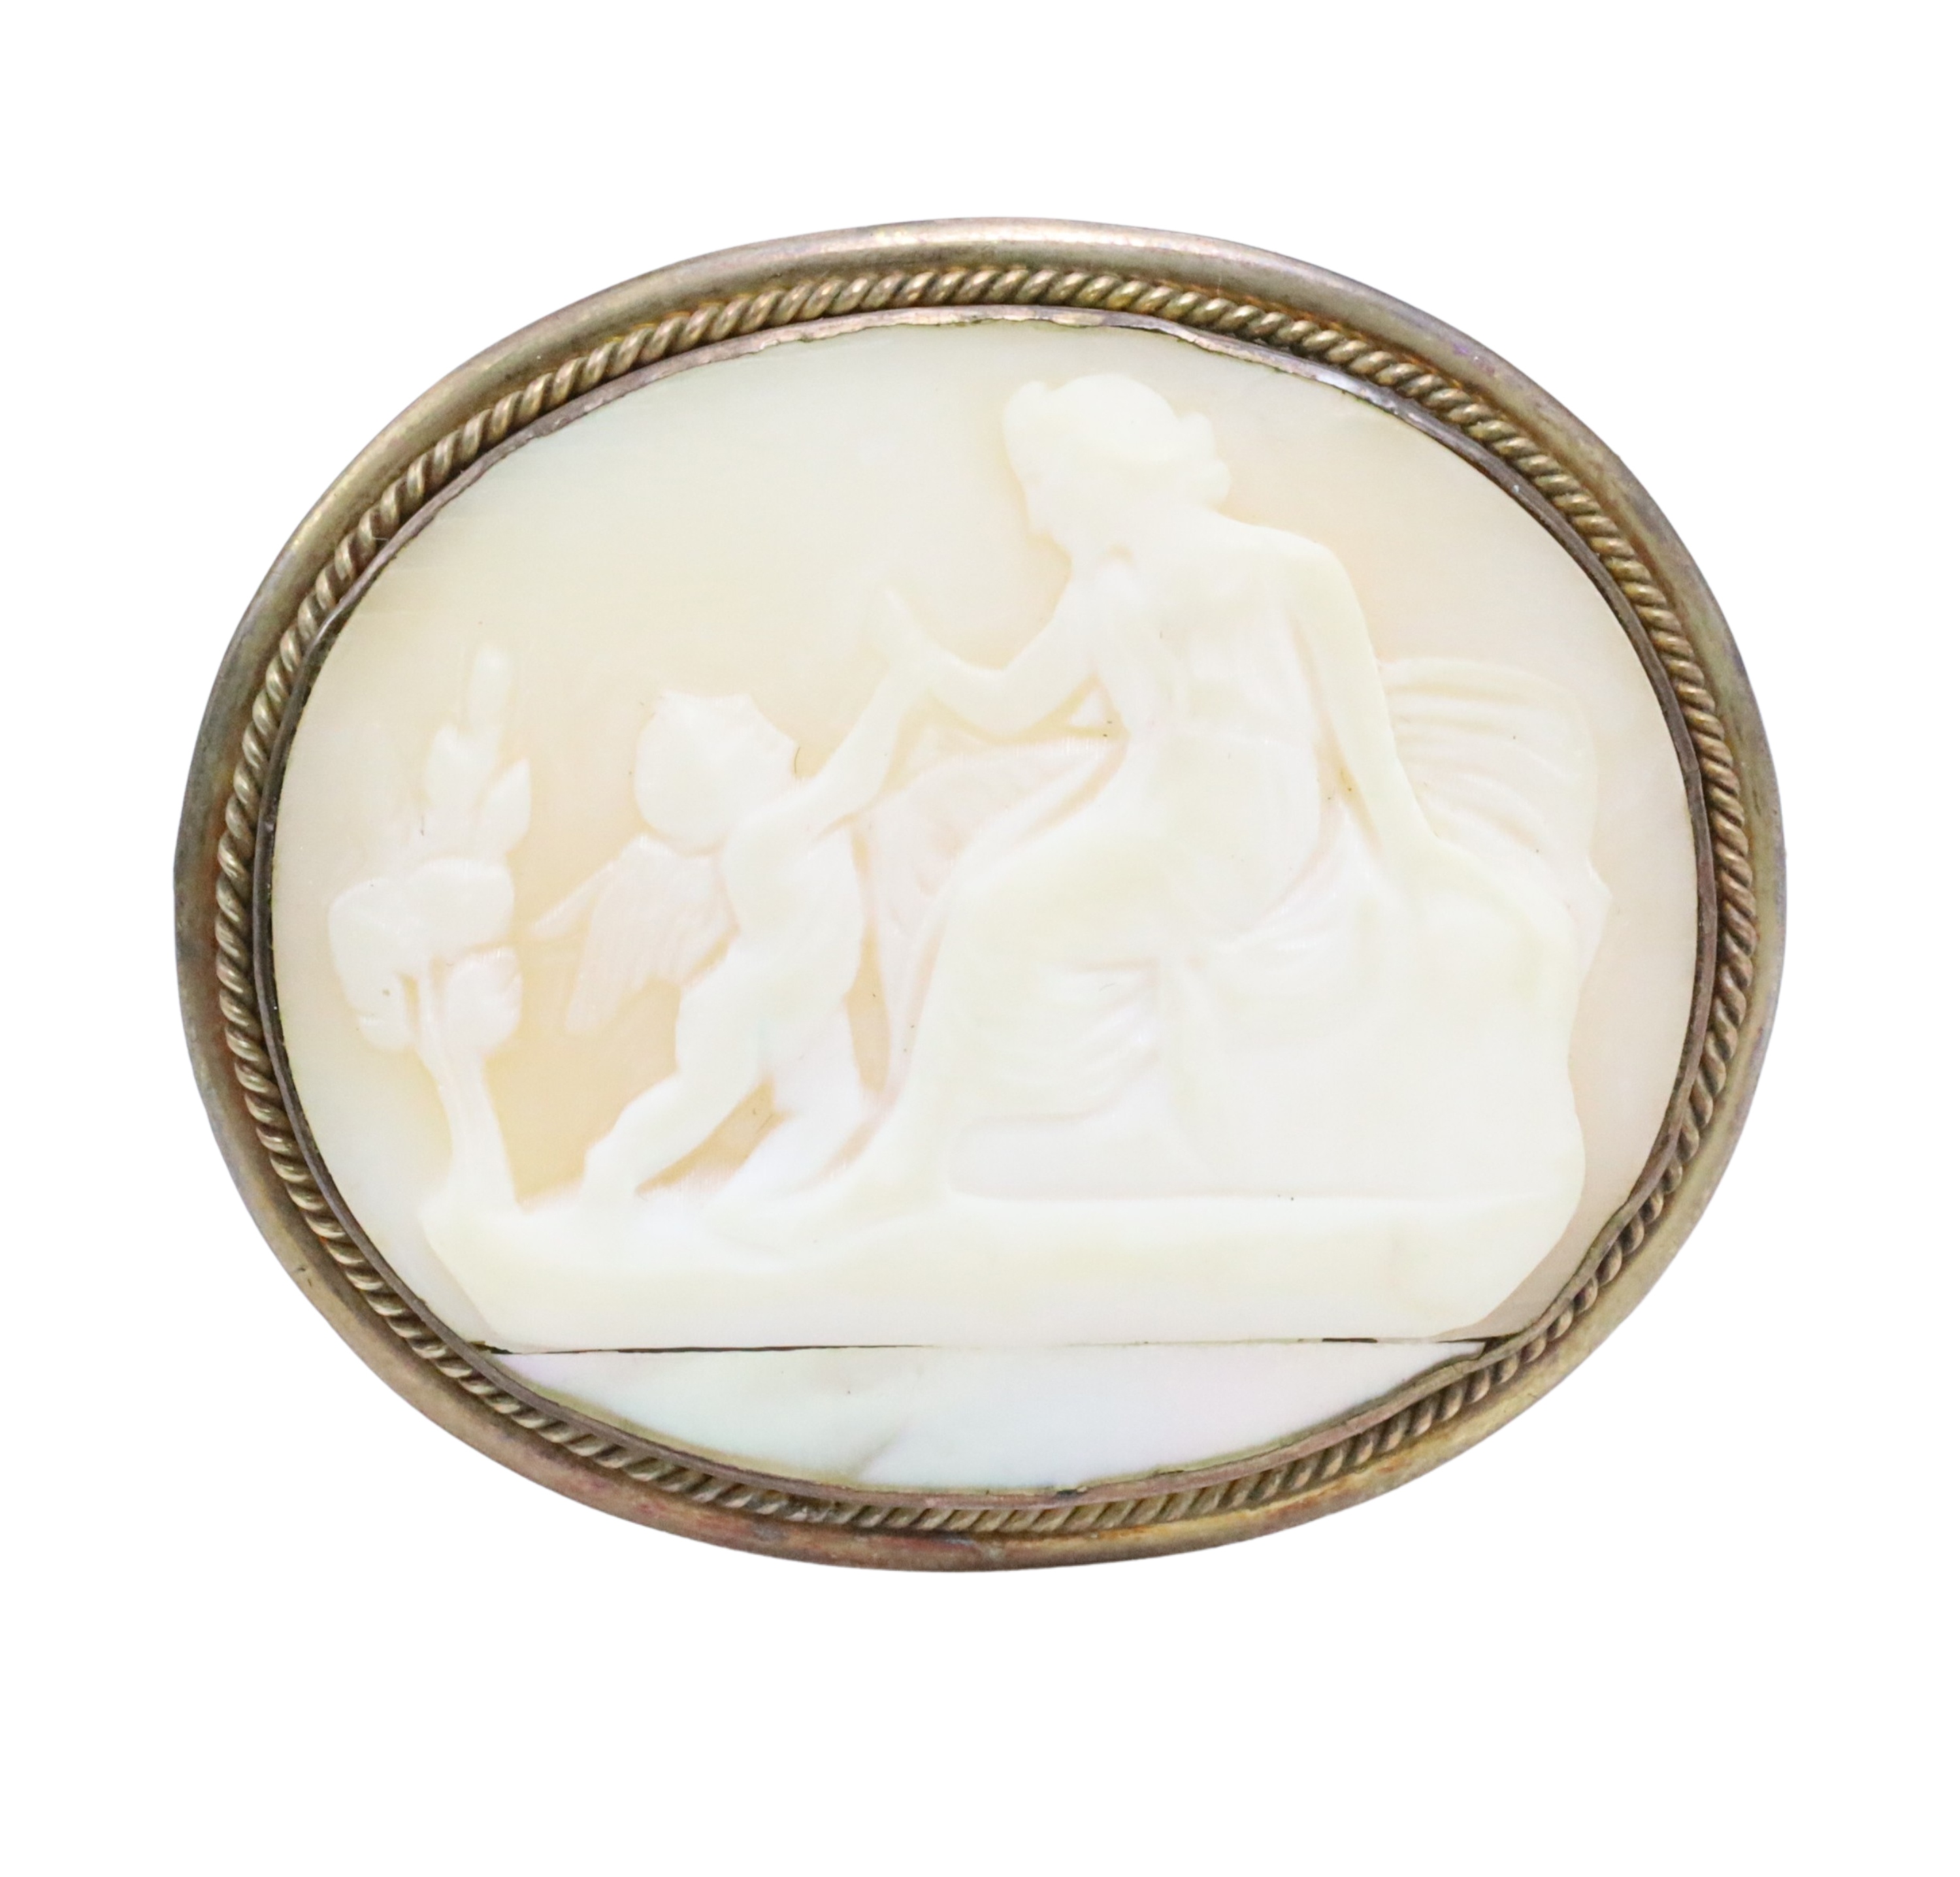 ANTIQUE OVAL CAMEO BROOCH Antique 3ccb9b